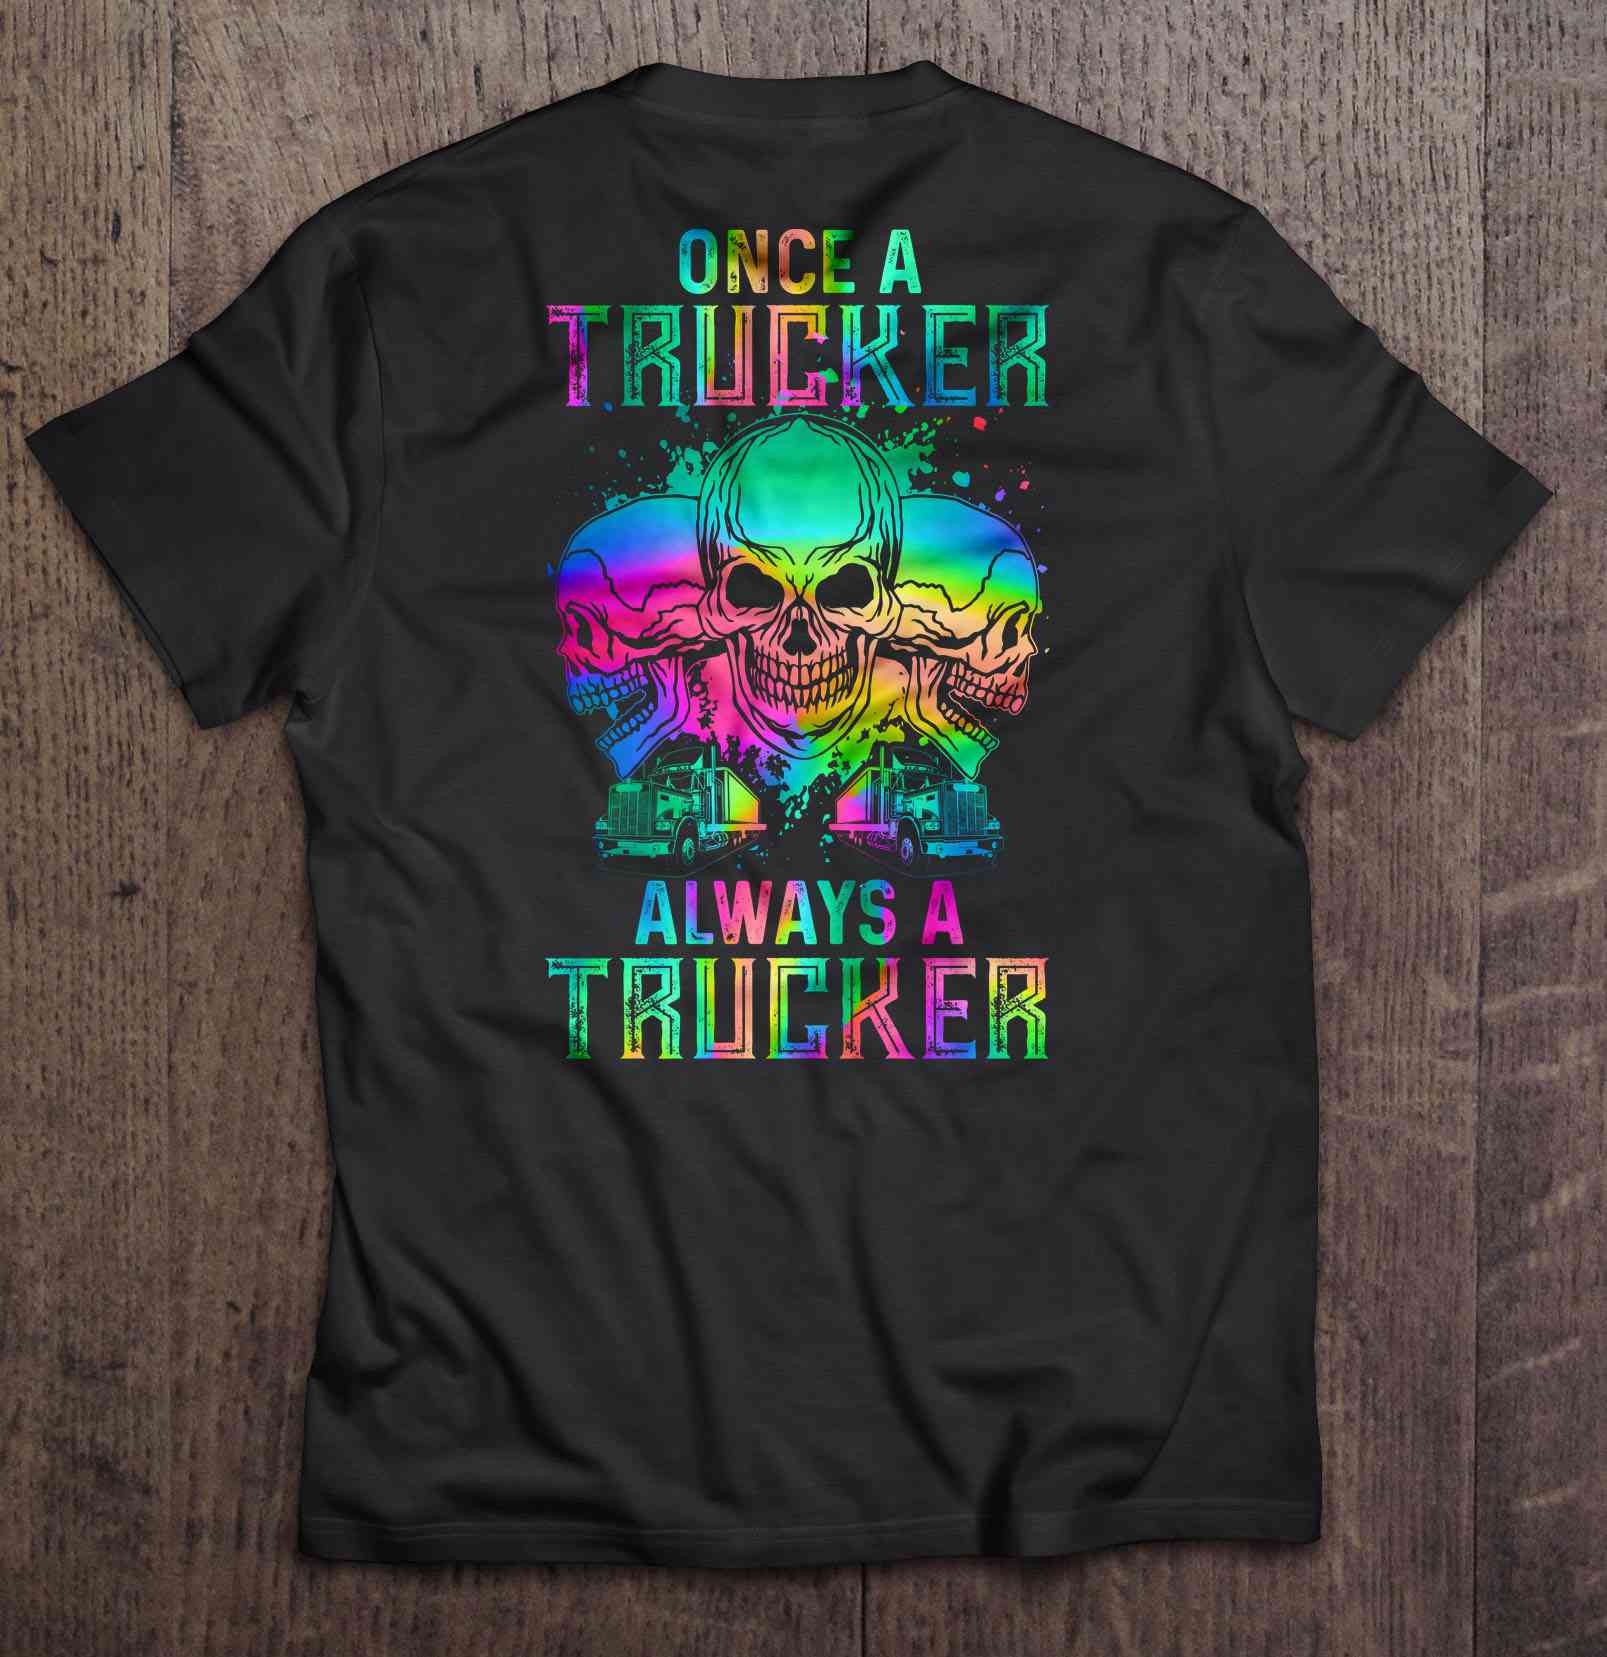 Once A Trucker Always A Trucker Colorful Splash Skull Version Shirt Gift Man Black Size Up To 5xl